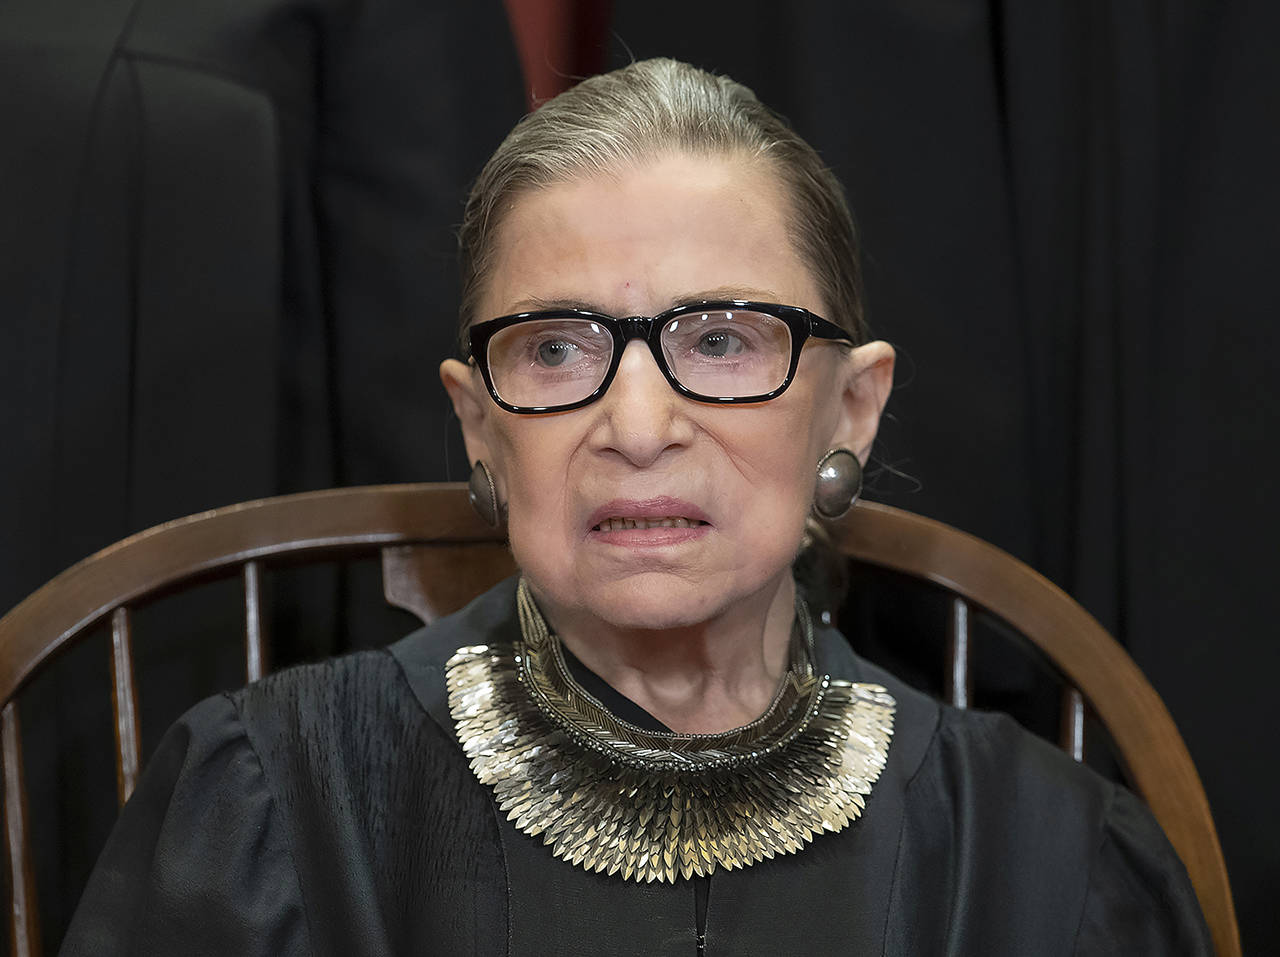 In this November 2018 photo, Associate Justice Ruth Bader Ginsburg sits with fellow Supreme Court justices for a group portrait at the Supreme Court Building in Washington. (AP Photo/J. Scott Applewhite, File)